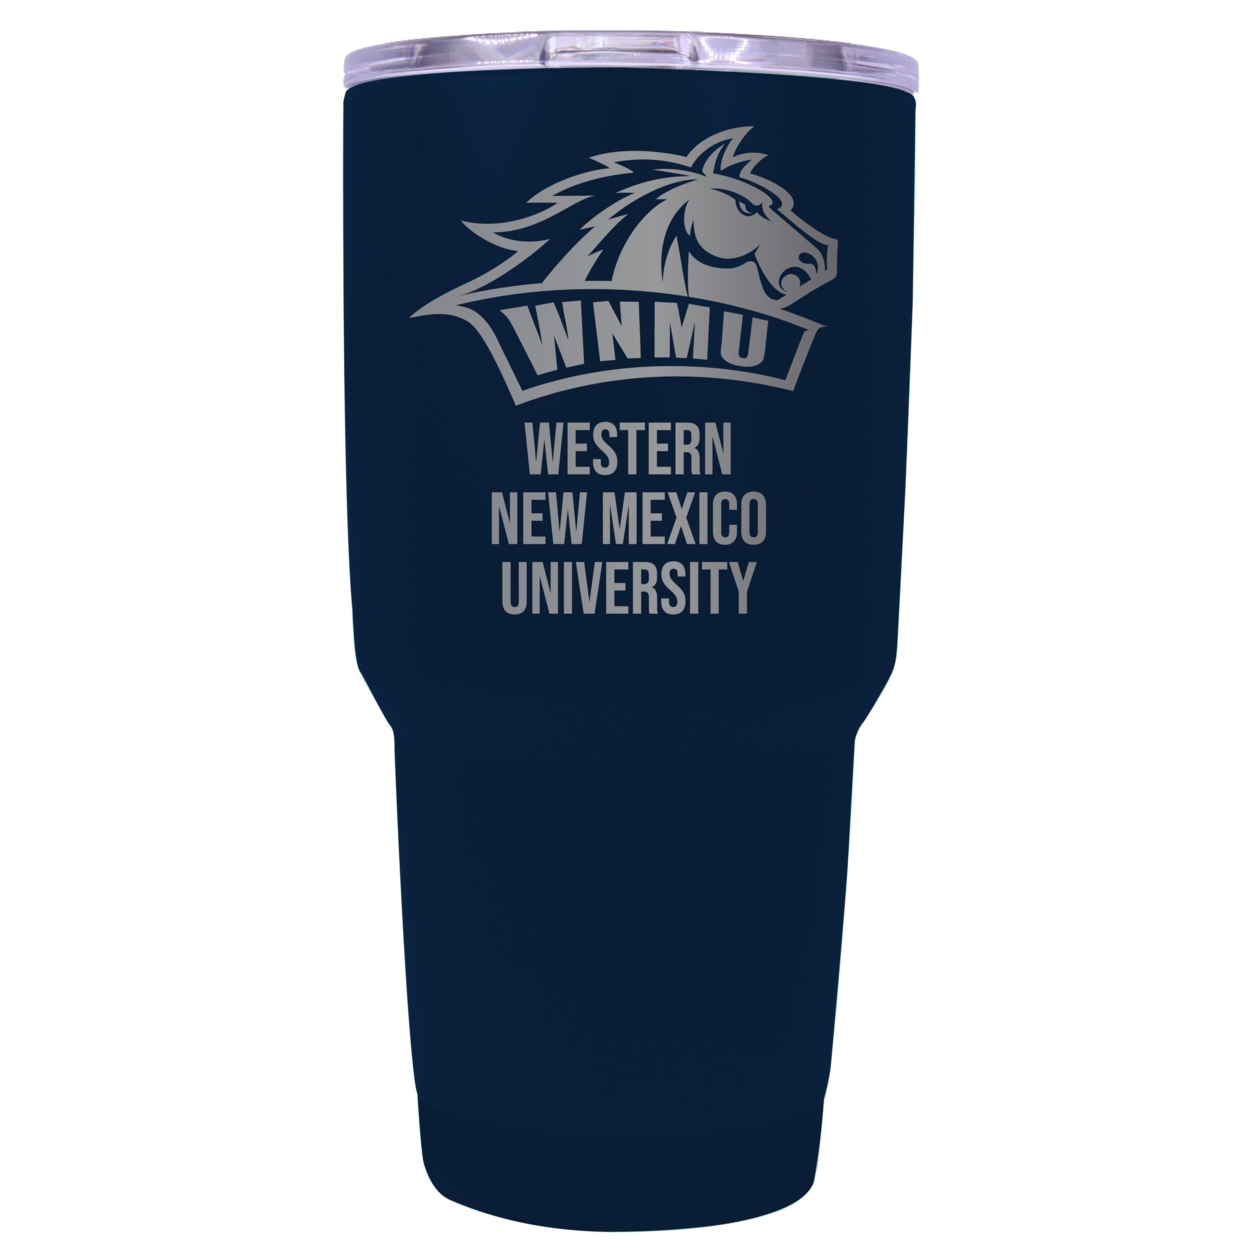 Western New Mexico University 24 Oz Laser Engraved Stainless Steel Insulated Tumbler - Choose Your Color. - Red